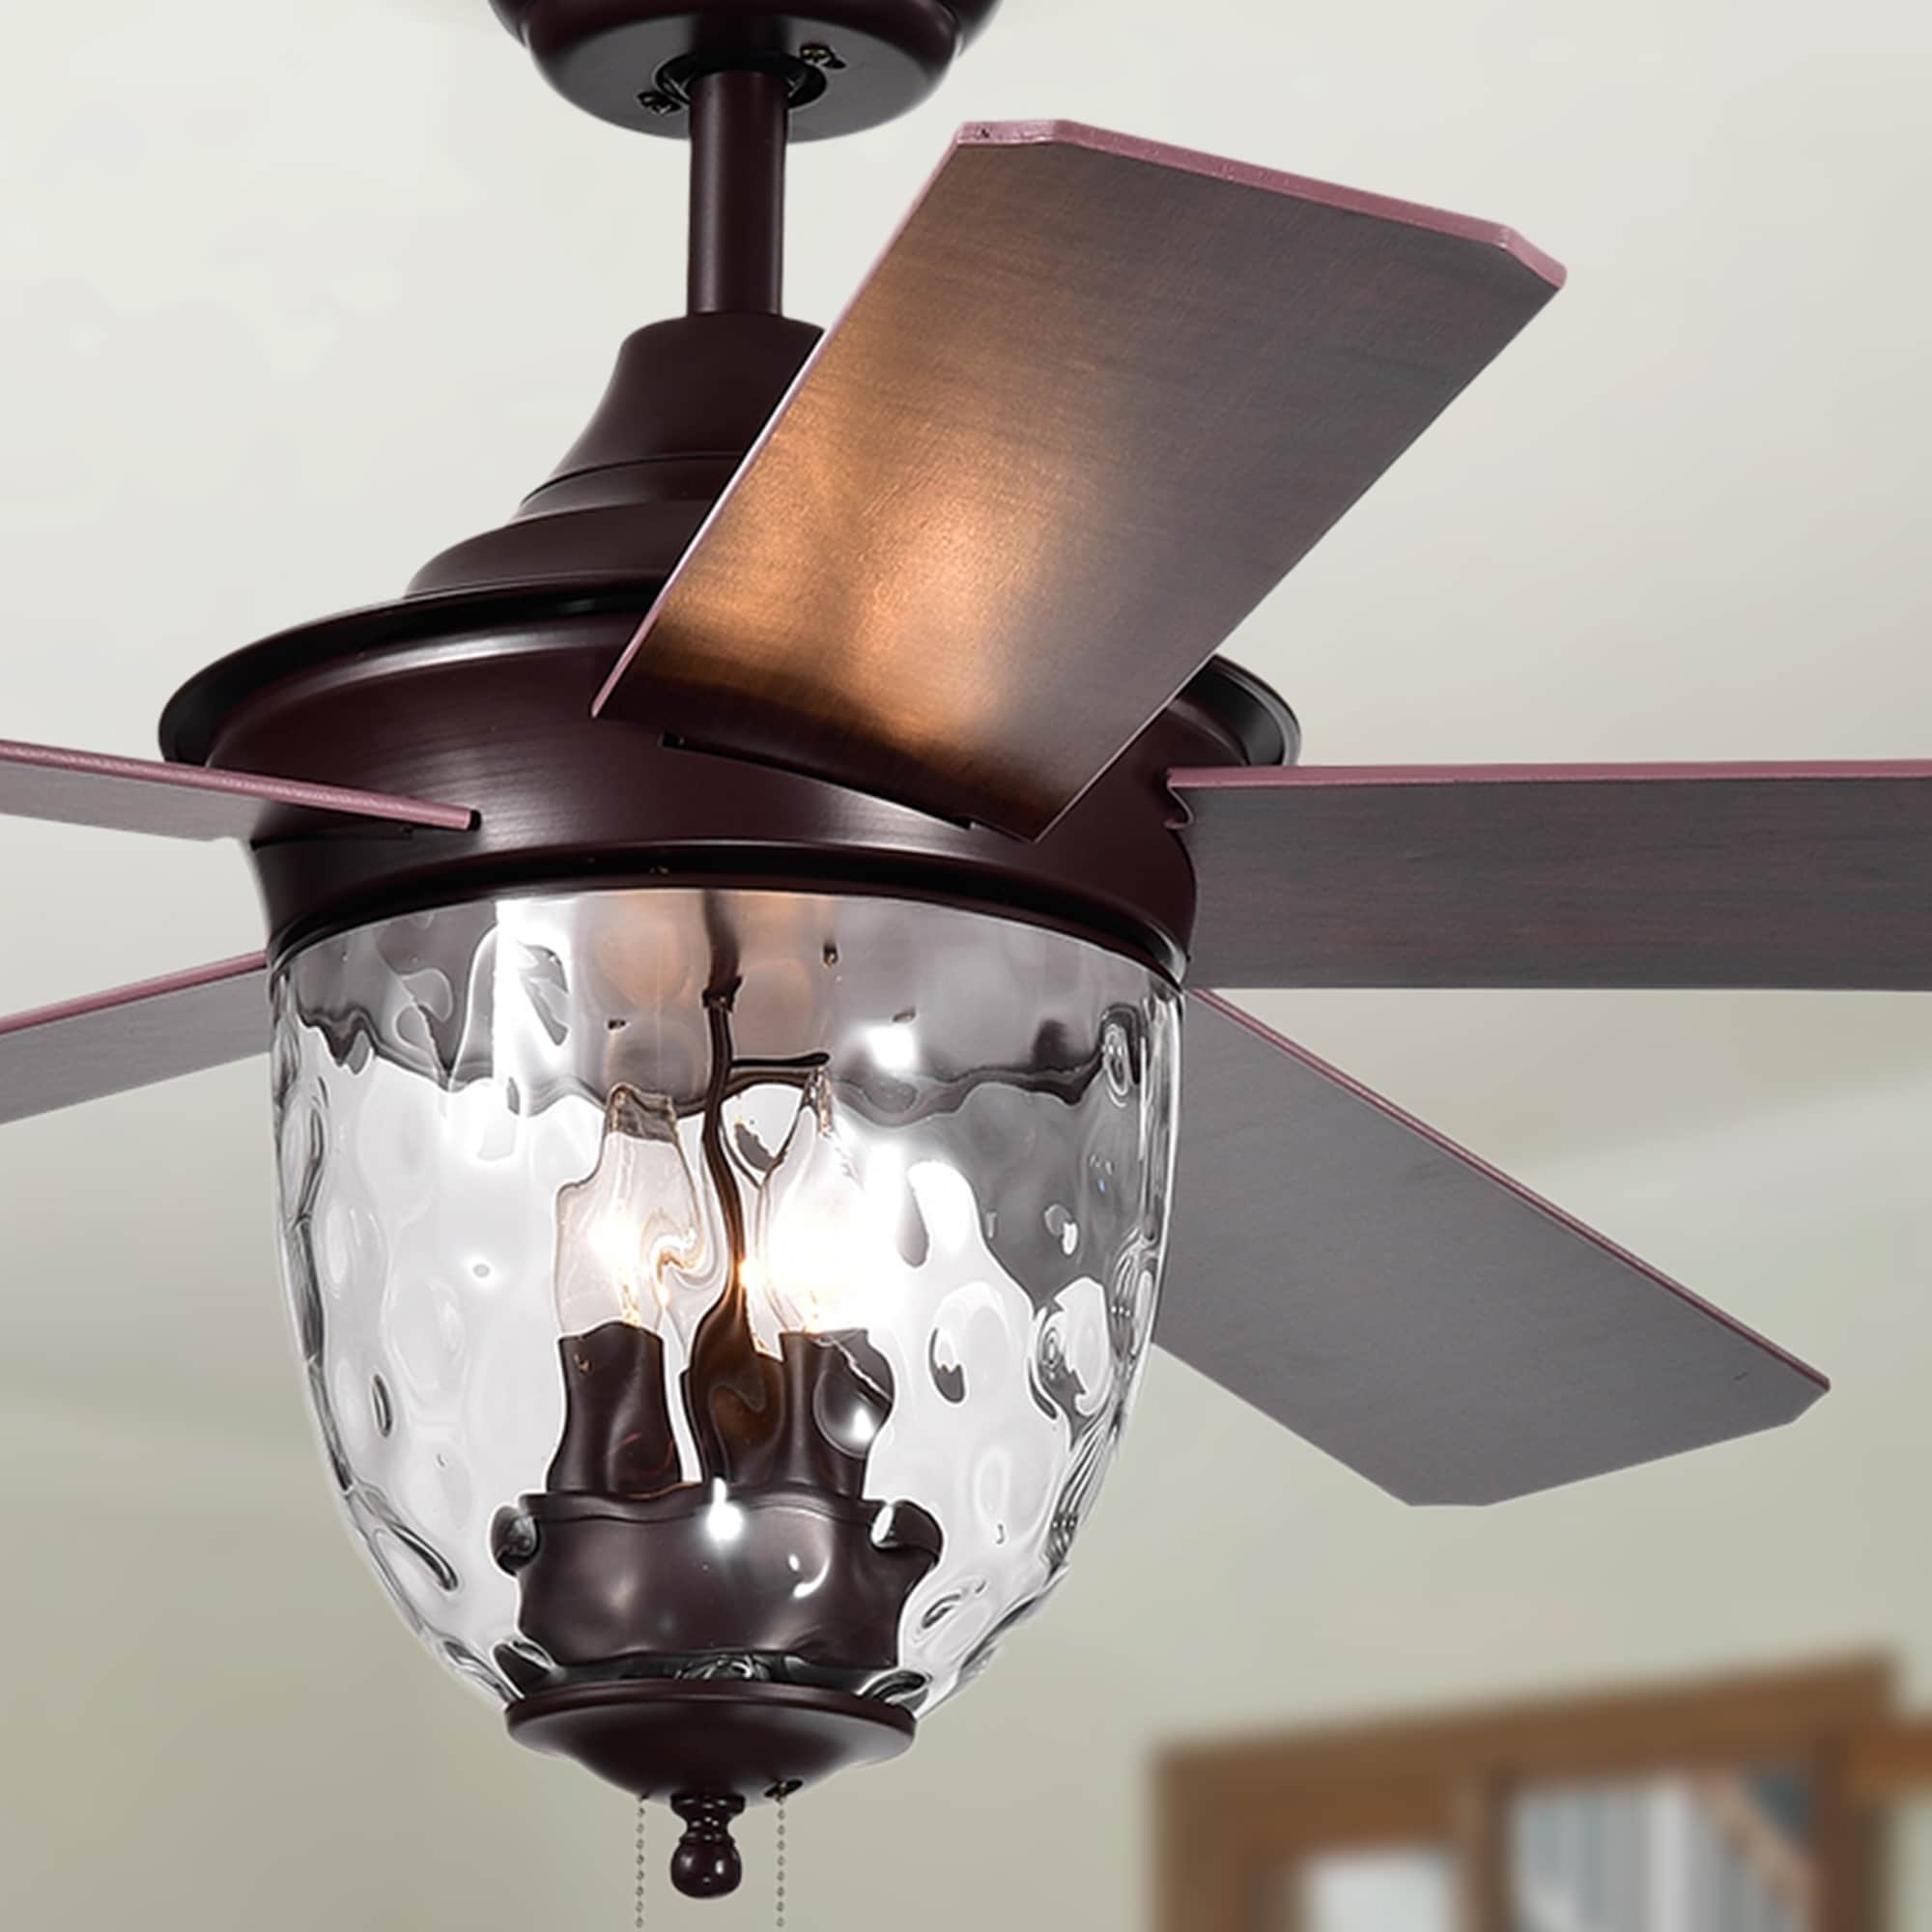 Josalie 3 Light Clear Glass 5 Blade Brown Finish 52 Inch Ceiling Fan 2 Color Option Blades